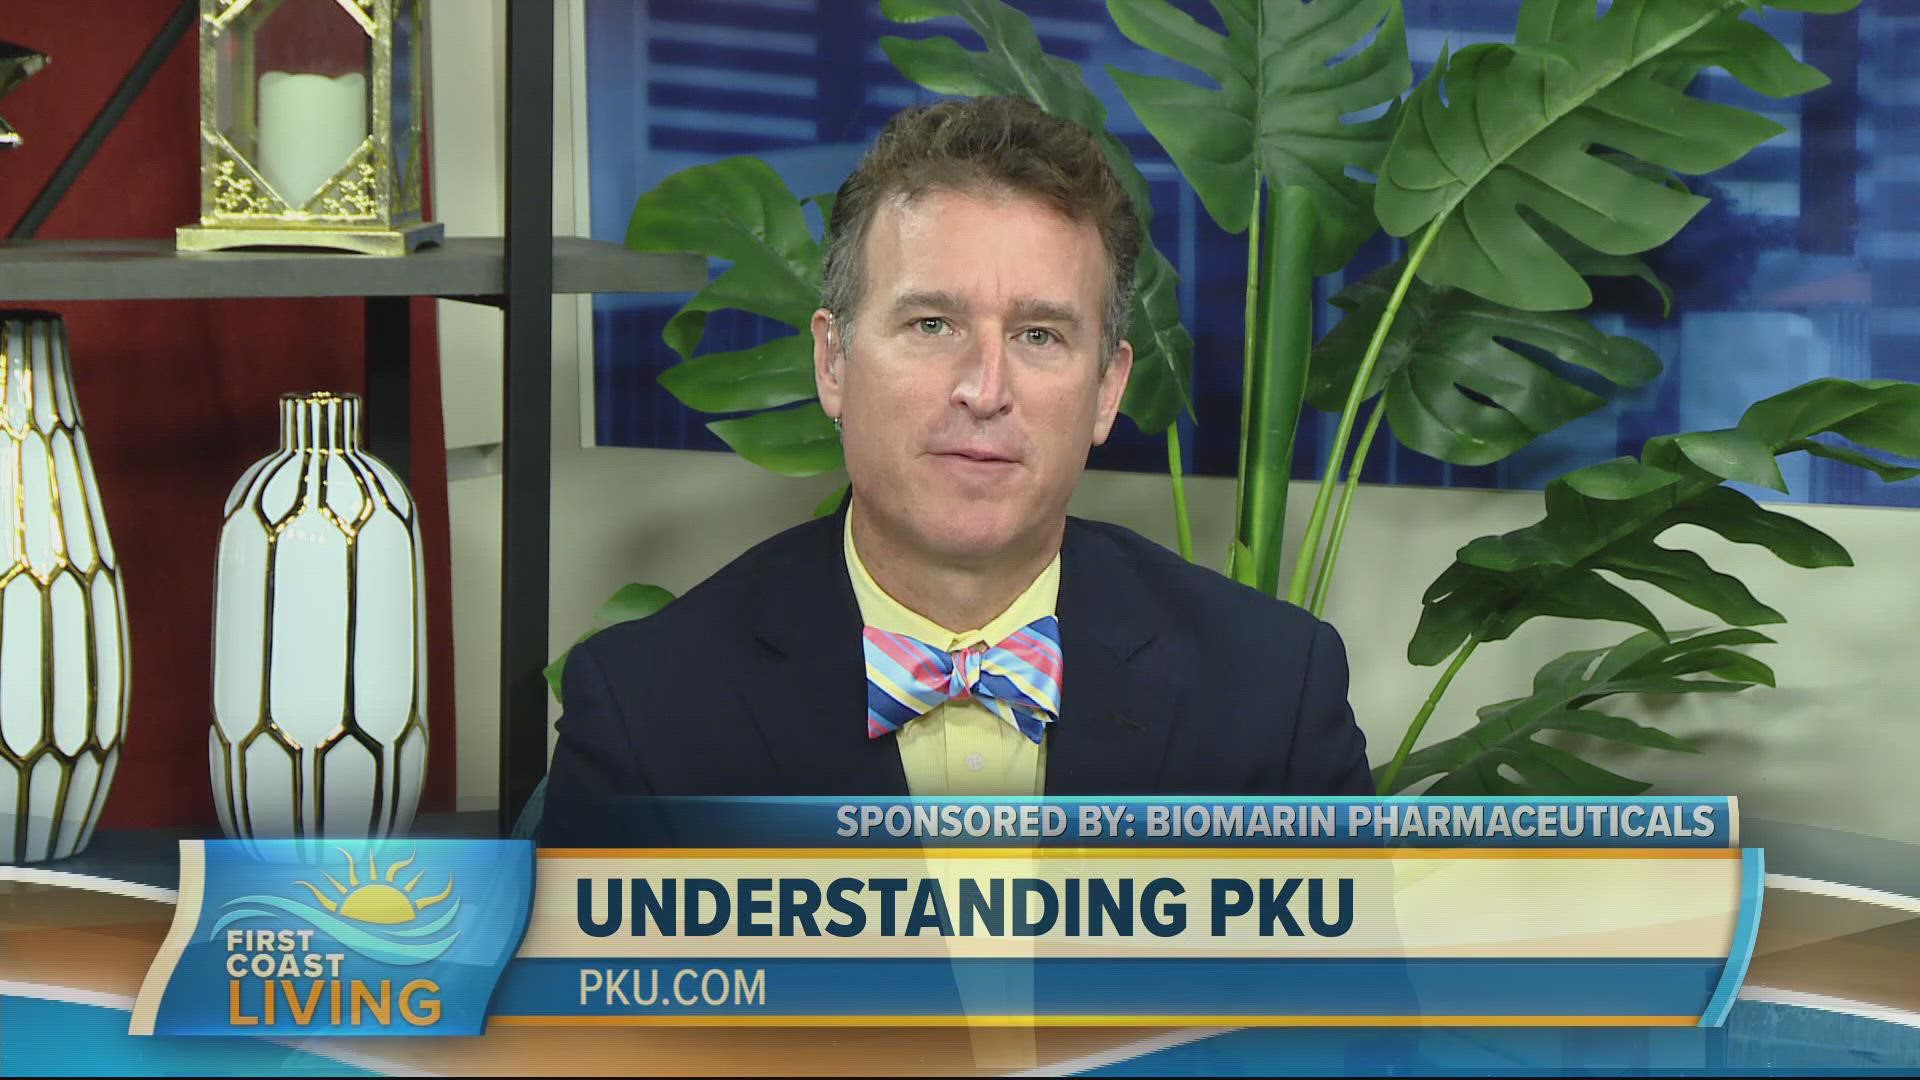 Dr. Barbara Burton discusses the importance of raising awareness of PKU, as well as ways to manage this genetic condition.